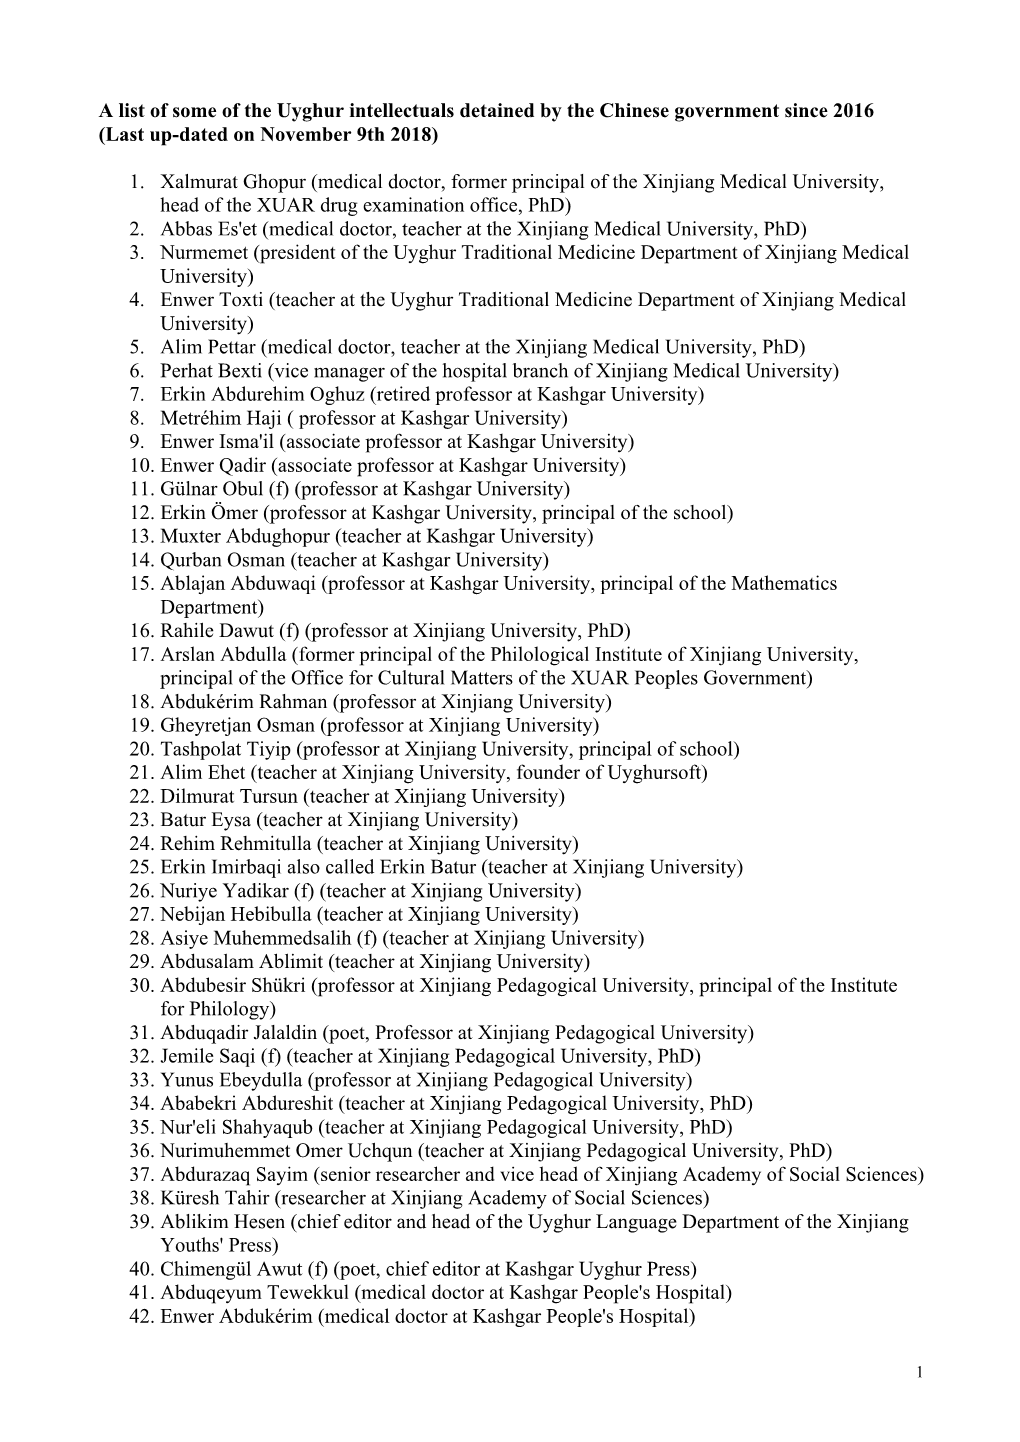 Page 1 a List of Some of the Uyghur Intellectuals Detained by the Chinese Government Since 2016 (Last Up-Dated on November 9Th 2018) Vern 1. Xalmurat Ghopur (Medical Doctor, Former